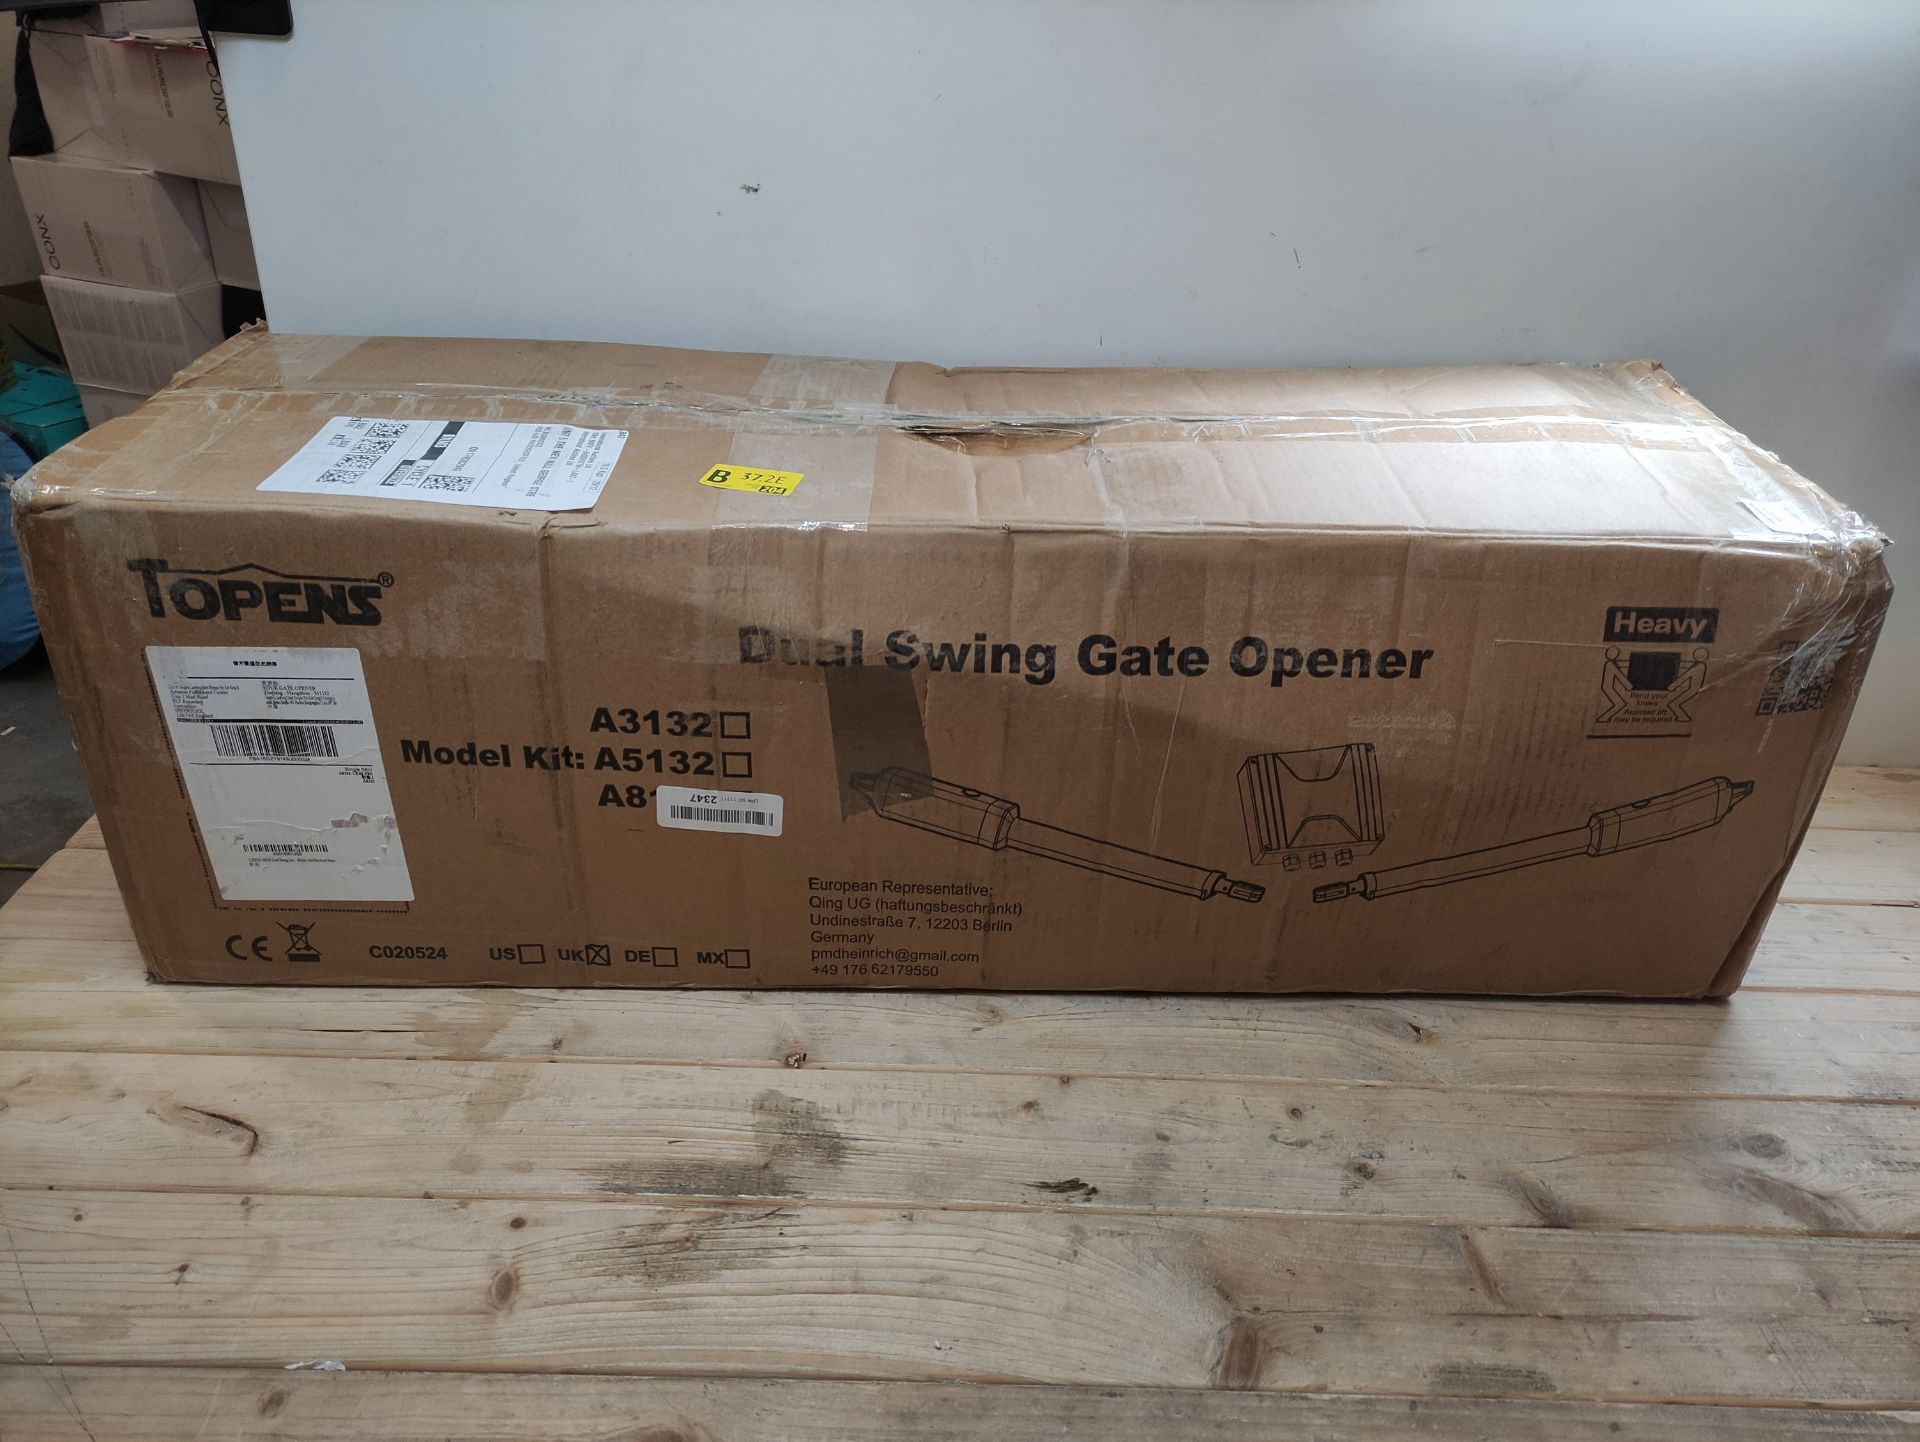 RRP £454.47 TOPENS A8132 Dual Swing Gate Opener Heavy Duty Automatic - Image 2 of 2